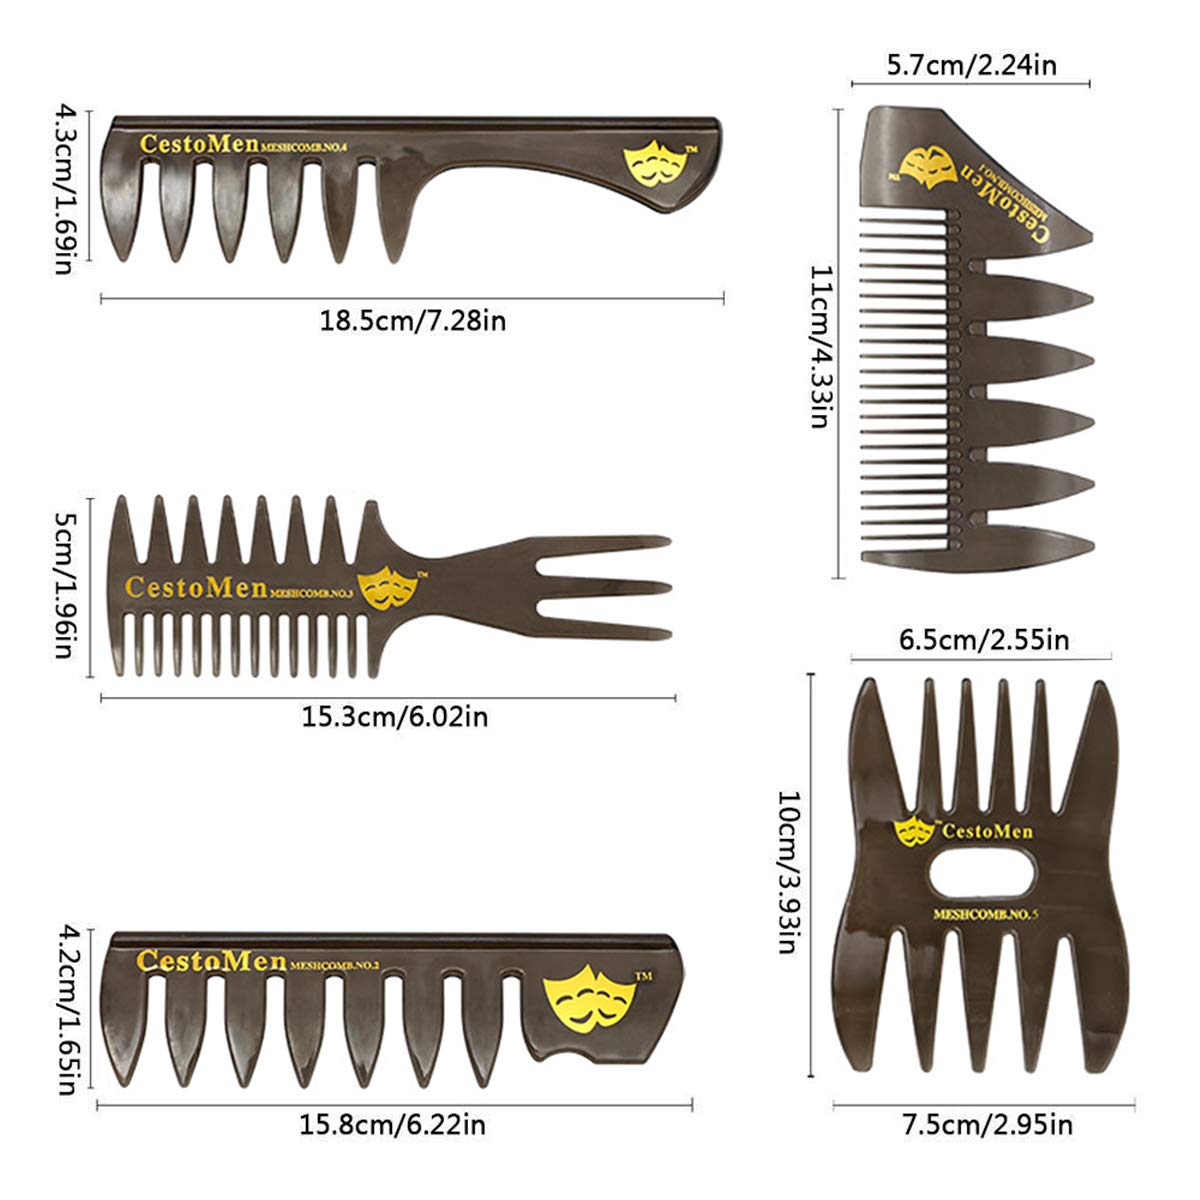 Amelar 5 PCS Hair Comb Styling Set Barber Hairstylist Accessories,Professional Shaping & Wet Pick Barber Brush Tools, Anti-Static Hair Brush for Men Boys